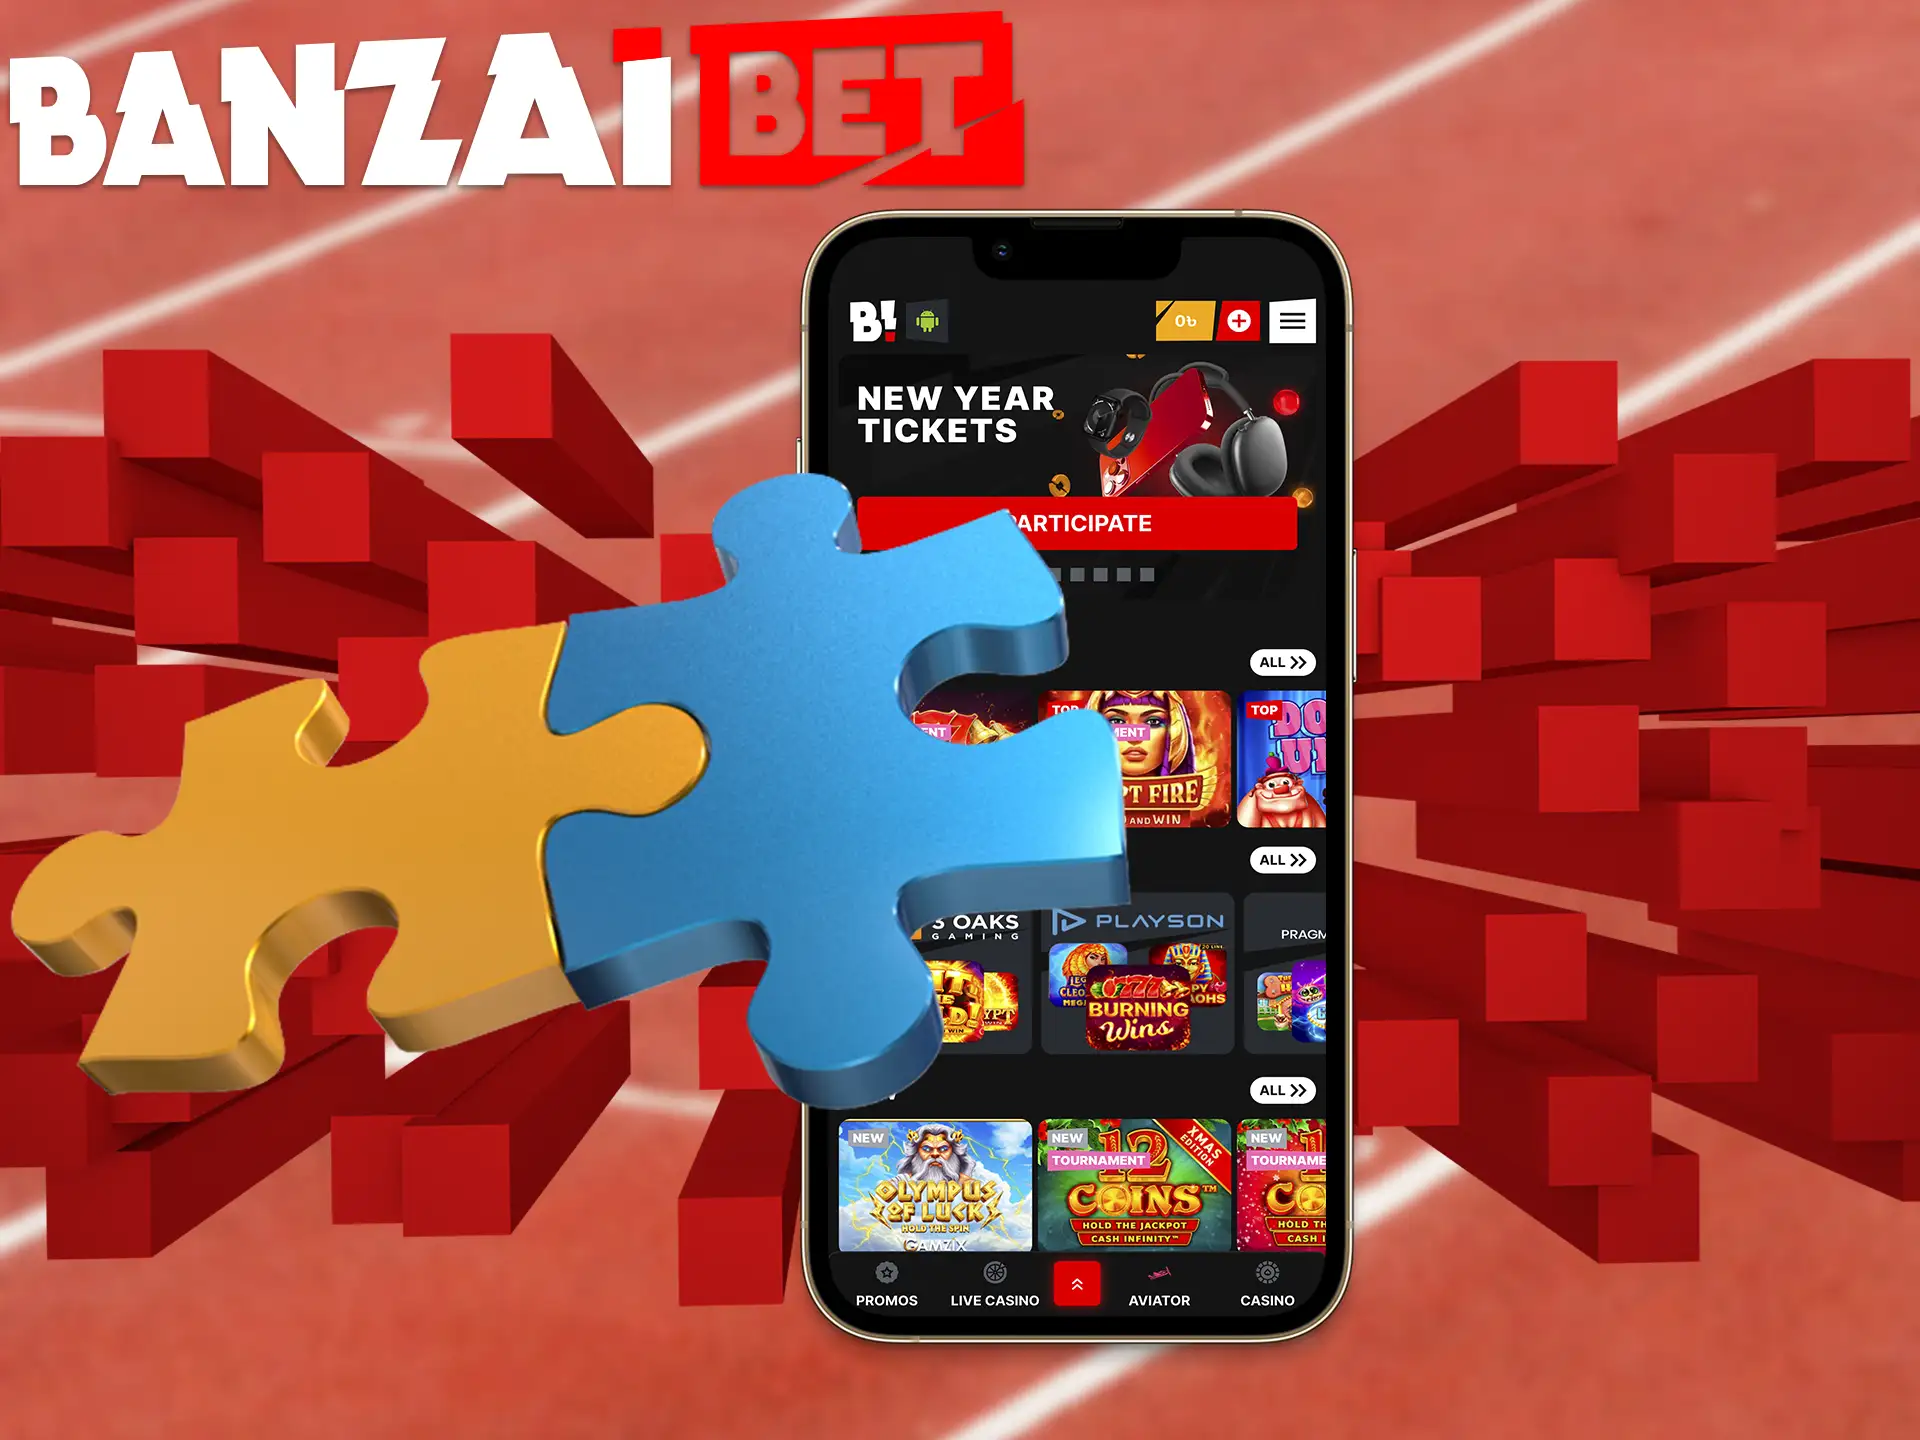 If you are not yet familiar with all the options in the Banzai App, our article will introduce them to you.